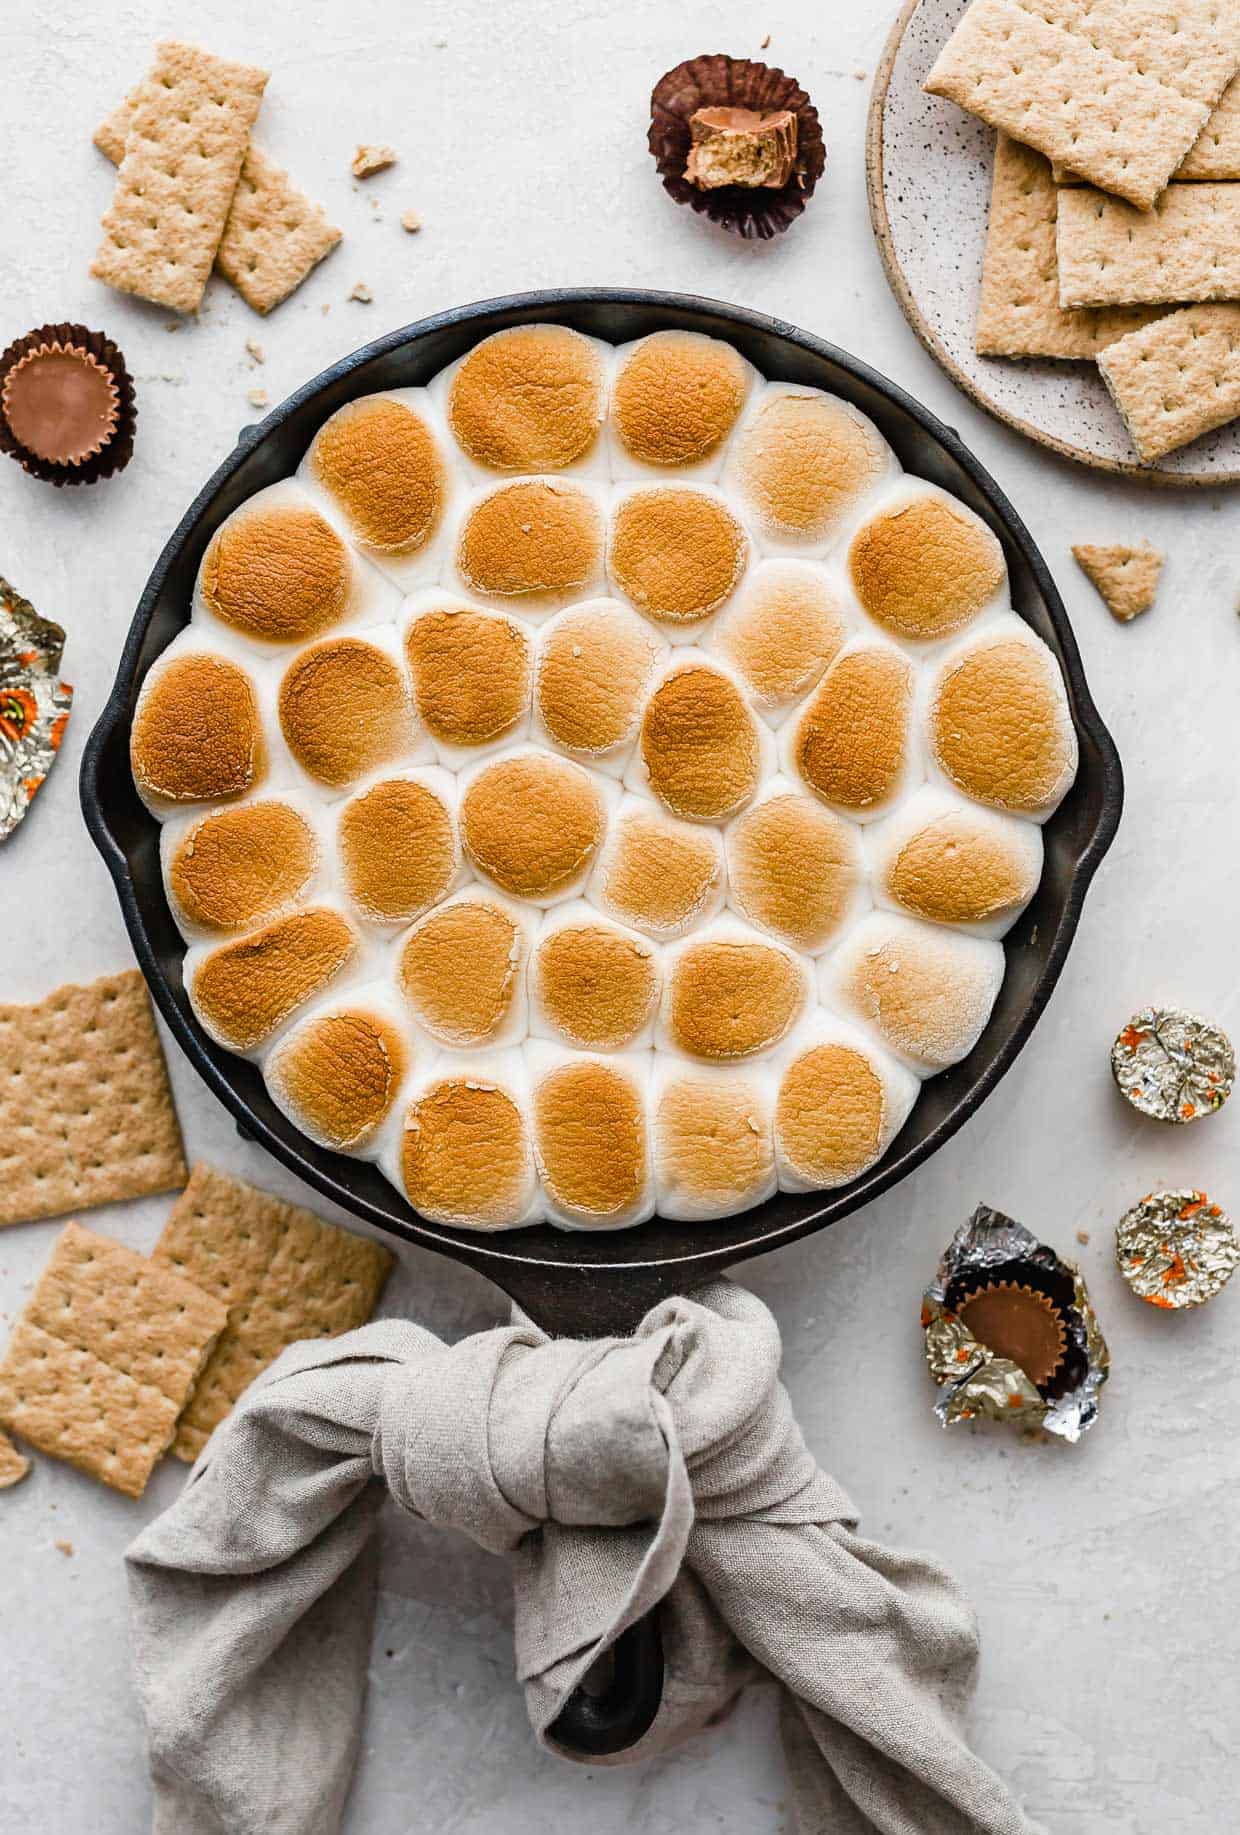 Reese's S'mores baked in a skillet on a light gray background.